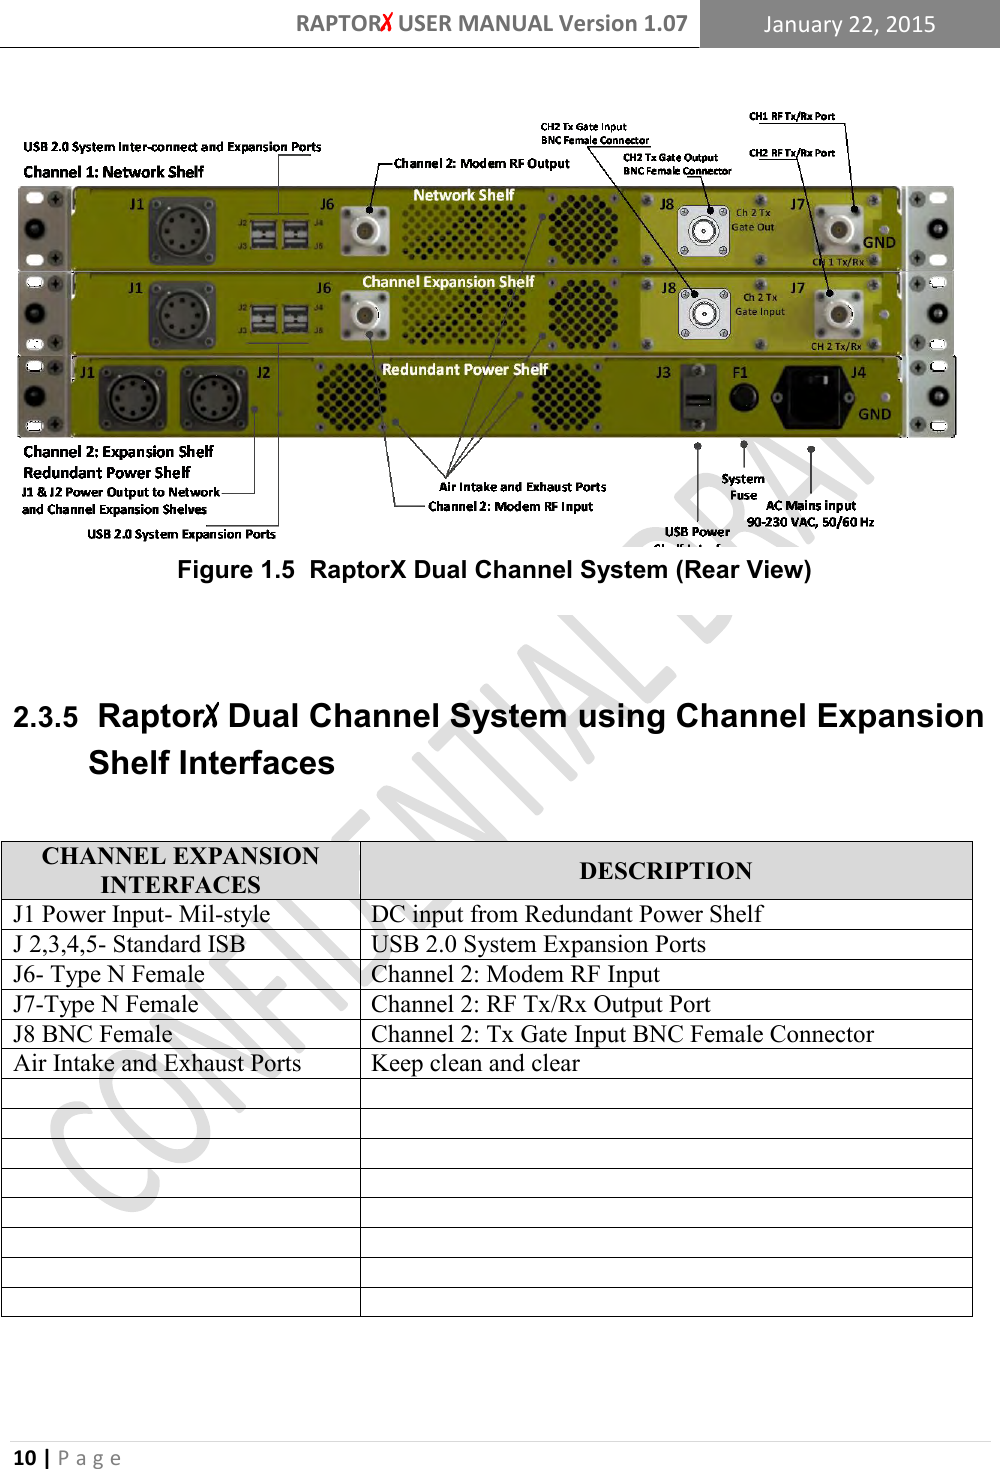 RAPTORX USER MANUAL Version 1.07 January 22, 2015  10 | P a g e        RaptorX Dual Channel System using Channel Expansion 2.3.5Shelf Interfaces  CHANNEL EXPANSION INTERFACES DESCRIPTION J1 Power Input- Mil-style  DC input from Redundant Power Shelf J 2,3,4,5- Standard ISB USB 2.0 System Expansion Ports J6- Type N Female Channel 2: Modem RF Input J7-Type N Female Channel 2: RF Tx/Rx Output Port J8 BNC Female Channel 2: Tx Gate Input BNC Female Connector Air Intake and Exhaust Ports Keep clean and clear                     Figure 1.5  RaptorX Dual Channel System (Rear View)  